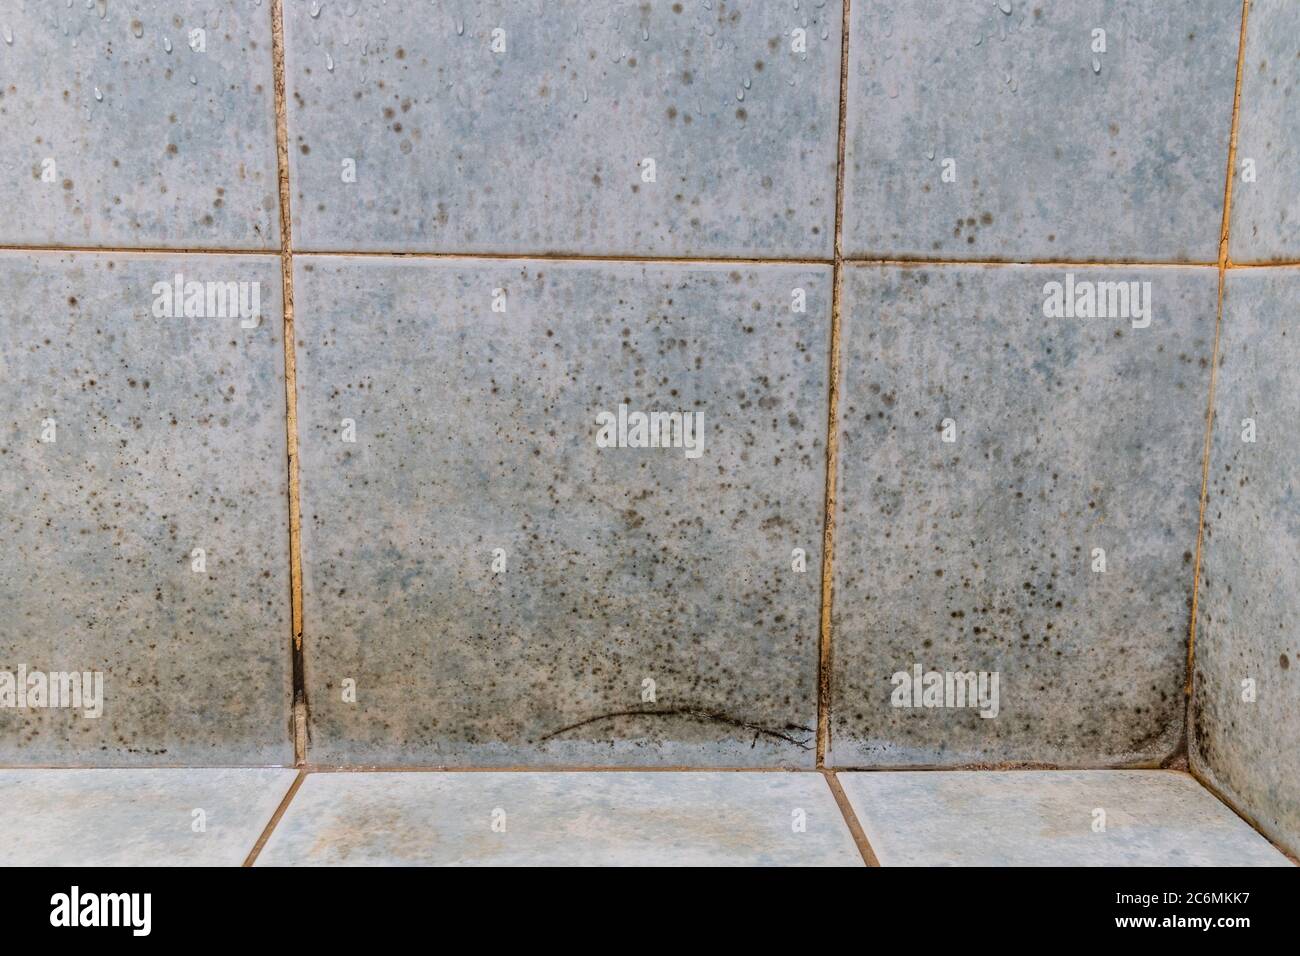 Mildew, dirty unhygienic mold growing on bathroom wall tile surface Stock Photo